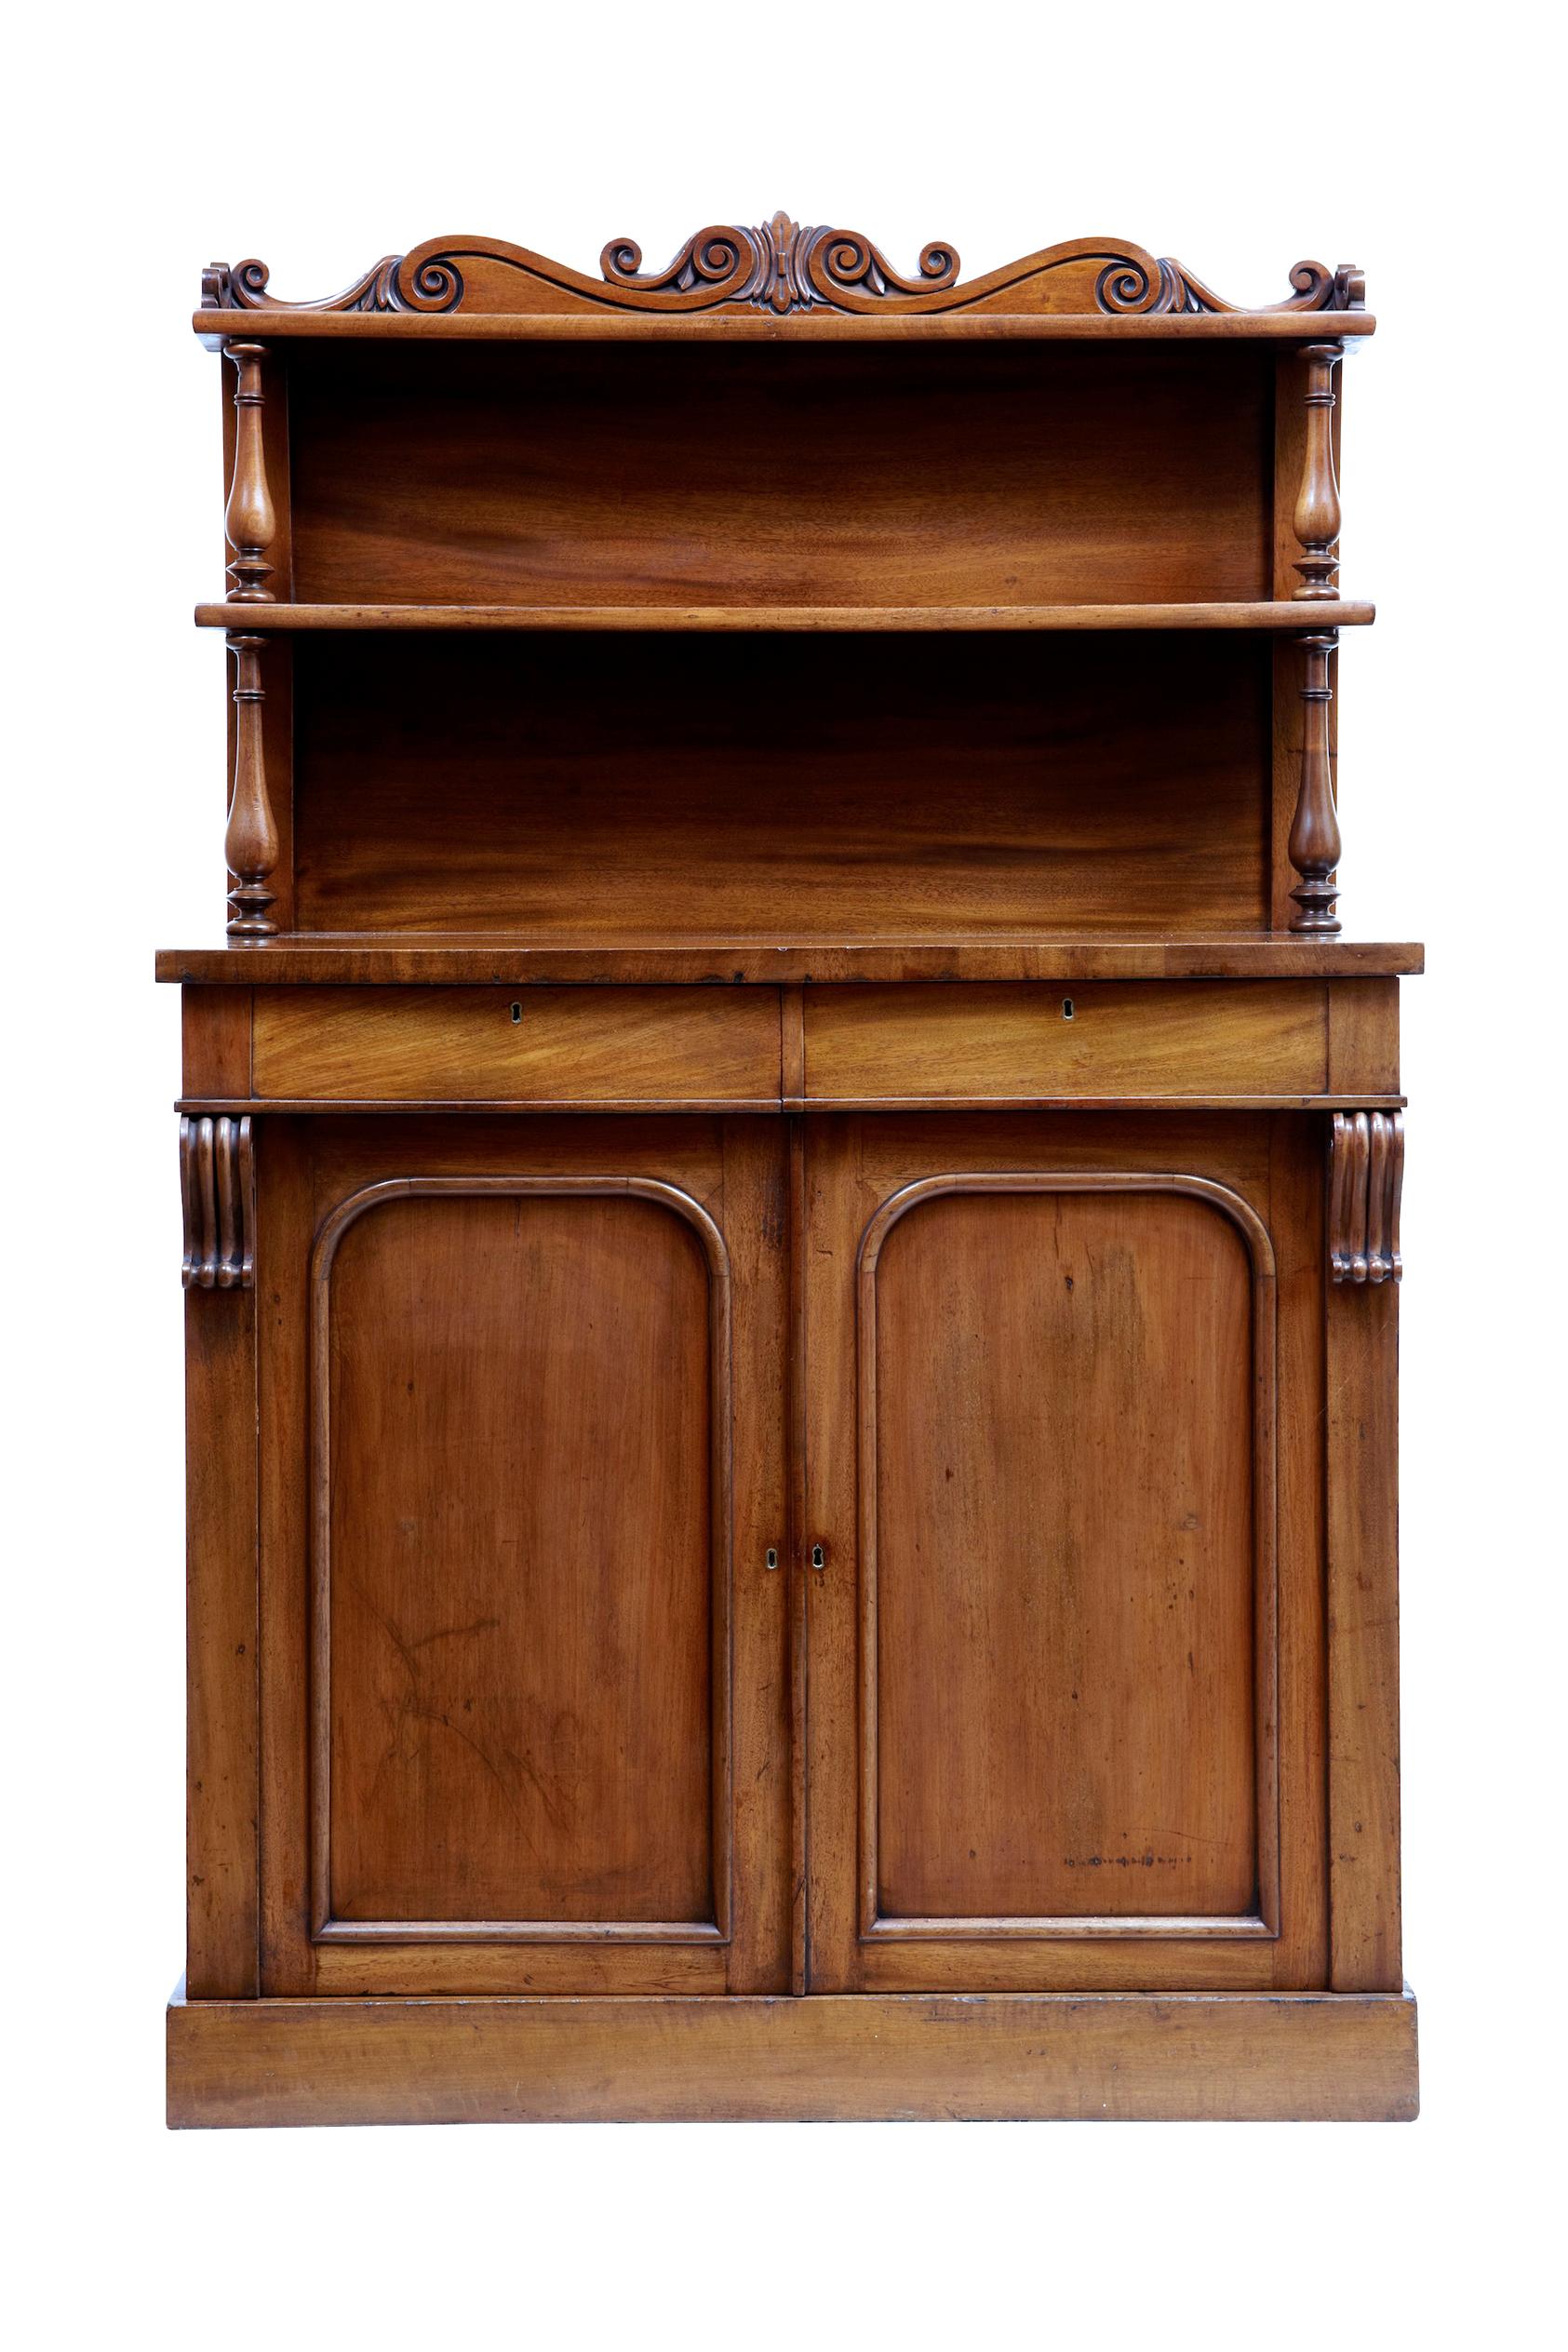 Mid-19th century French mahogany chiffonier sideboard, circa 1840.

Good quality sideboard made in rich mahogany. Top section with carved scroll gallery and 2 shelves supported by turned supports. 2 drawers below the top surface.

Double door